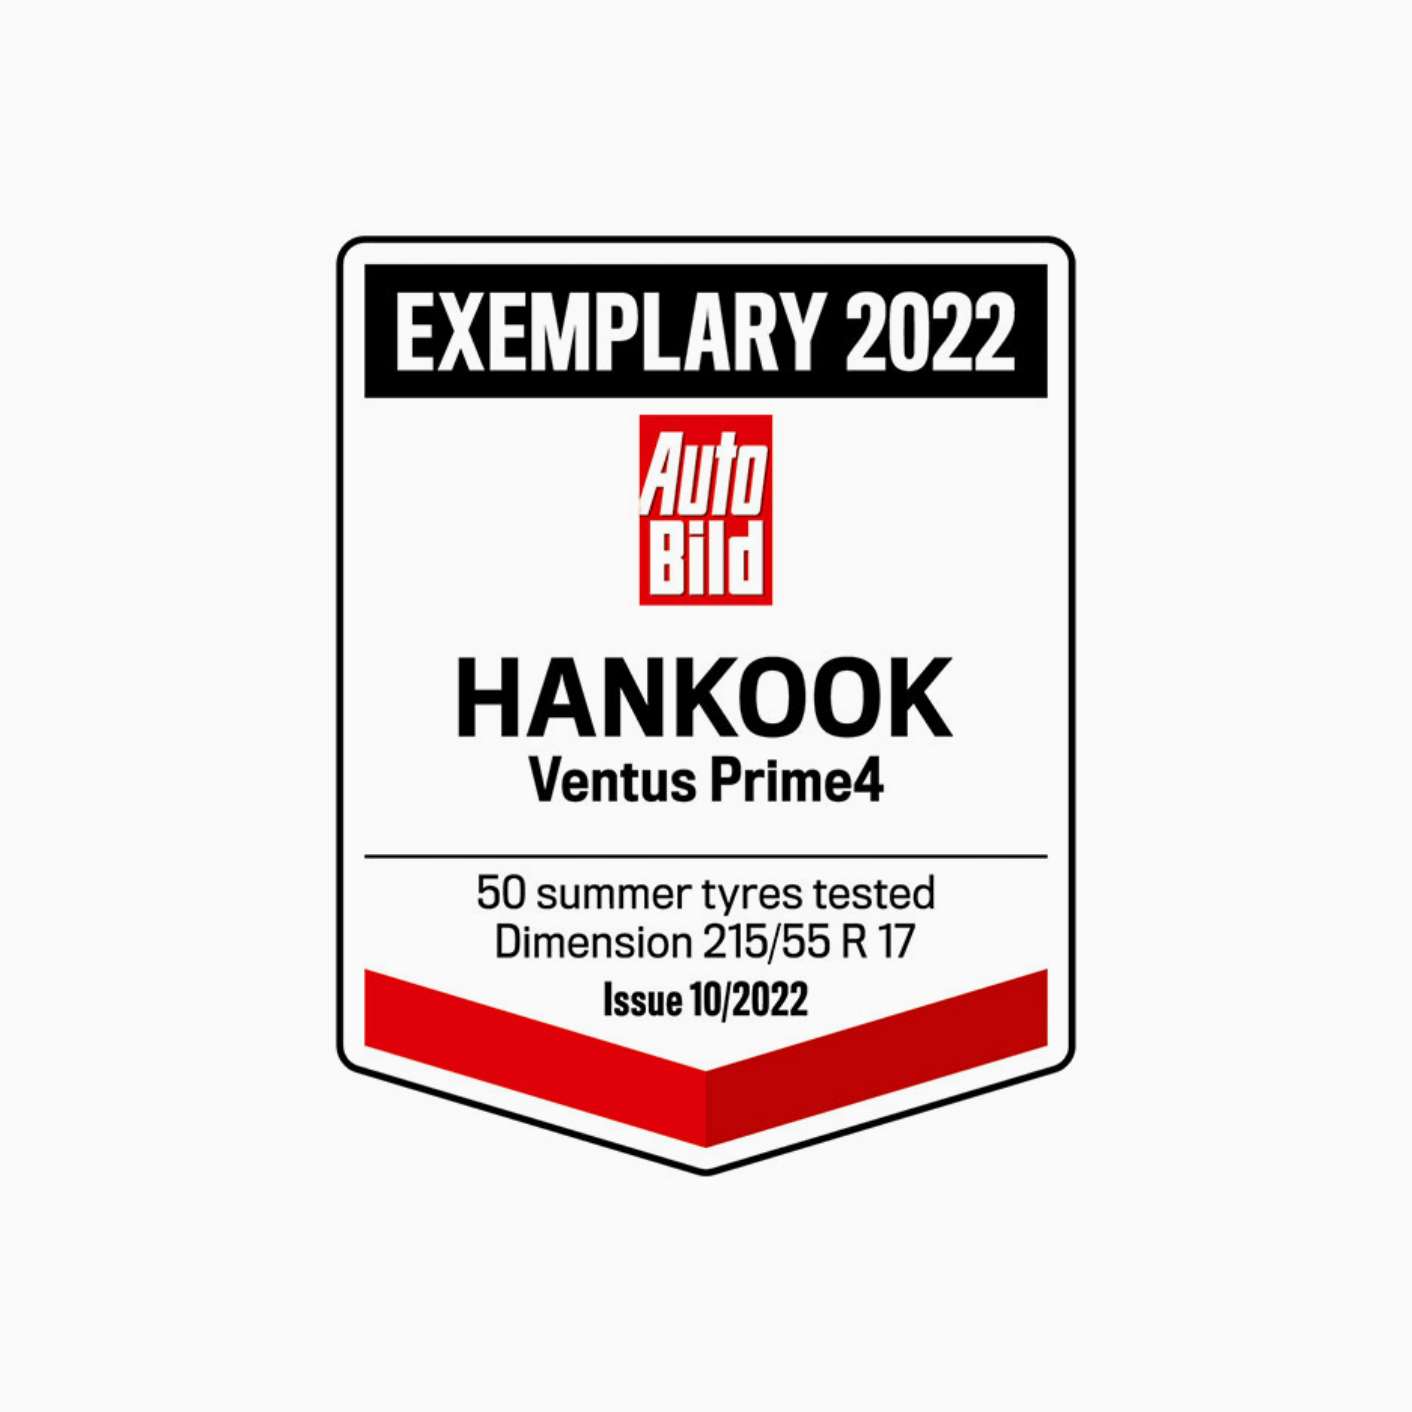 Hankook tires impress in summer tire tests by renowned independent car magazines